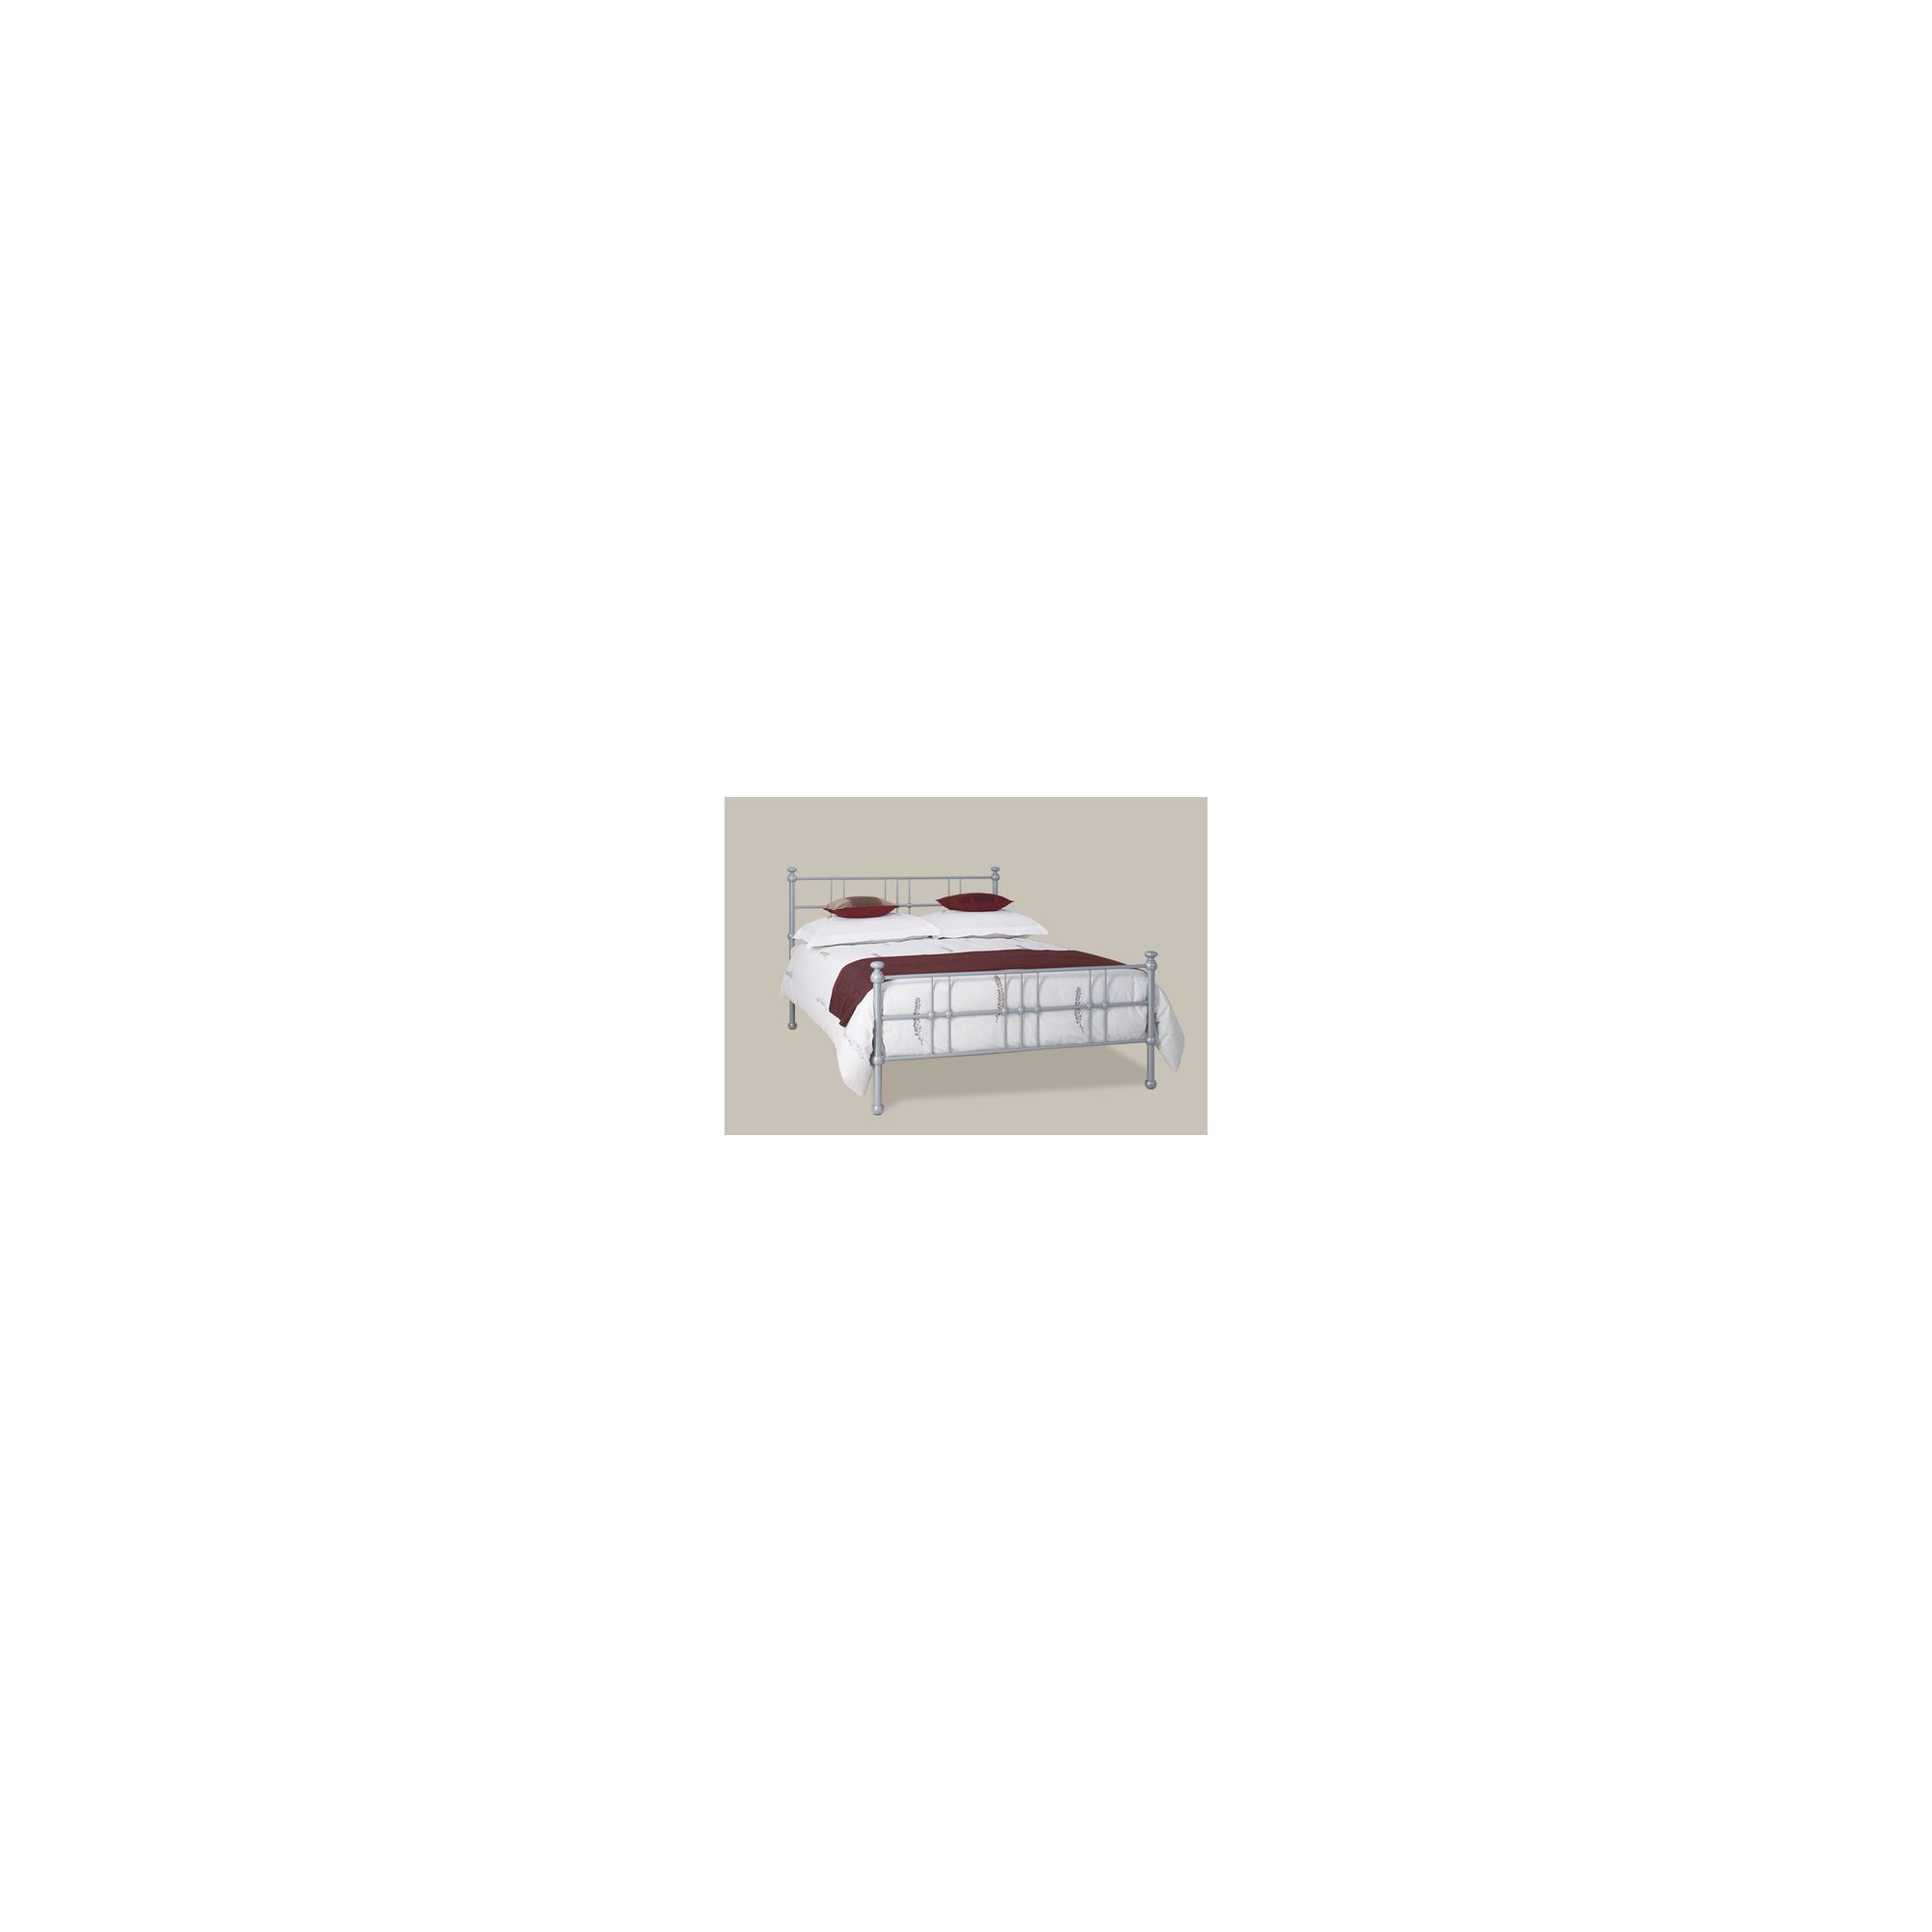 OBC Carnew Bed Frame - Single at Tesco Direct